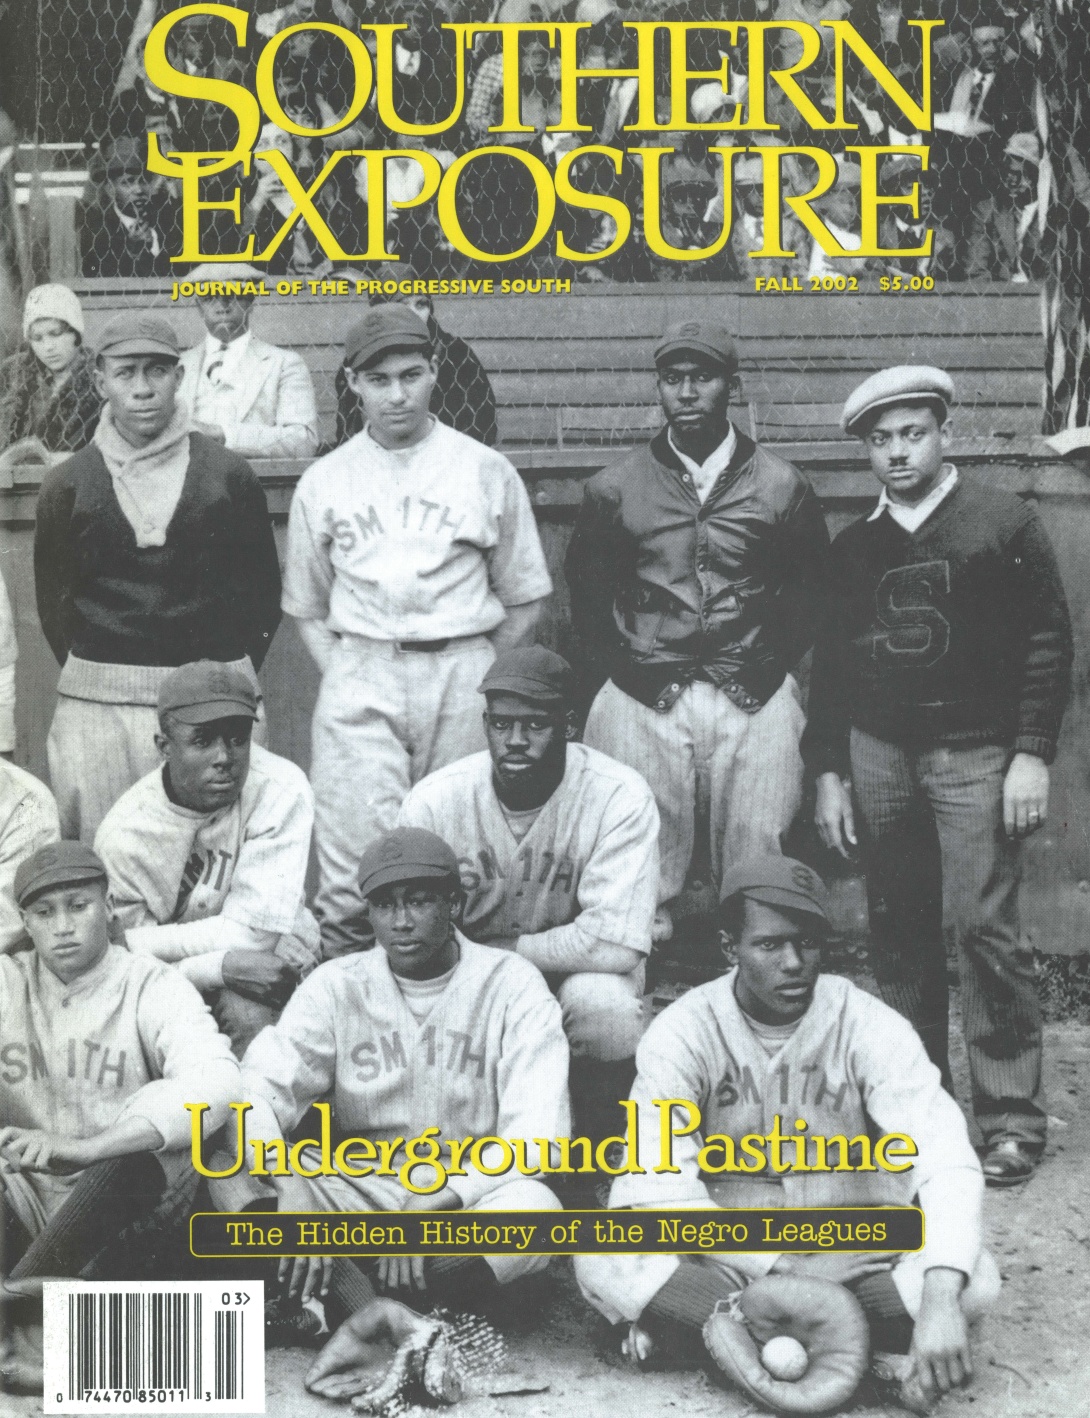 Magazine cover with black and white team photo of Negro Leagues baseball team, text reads "Underground Pastime: The Hidden Histroy of the Negro Leagues"